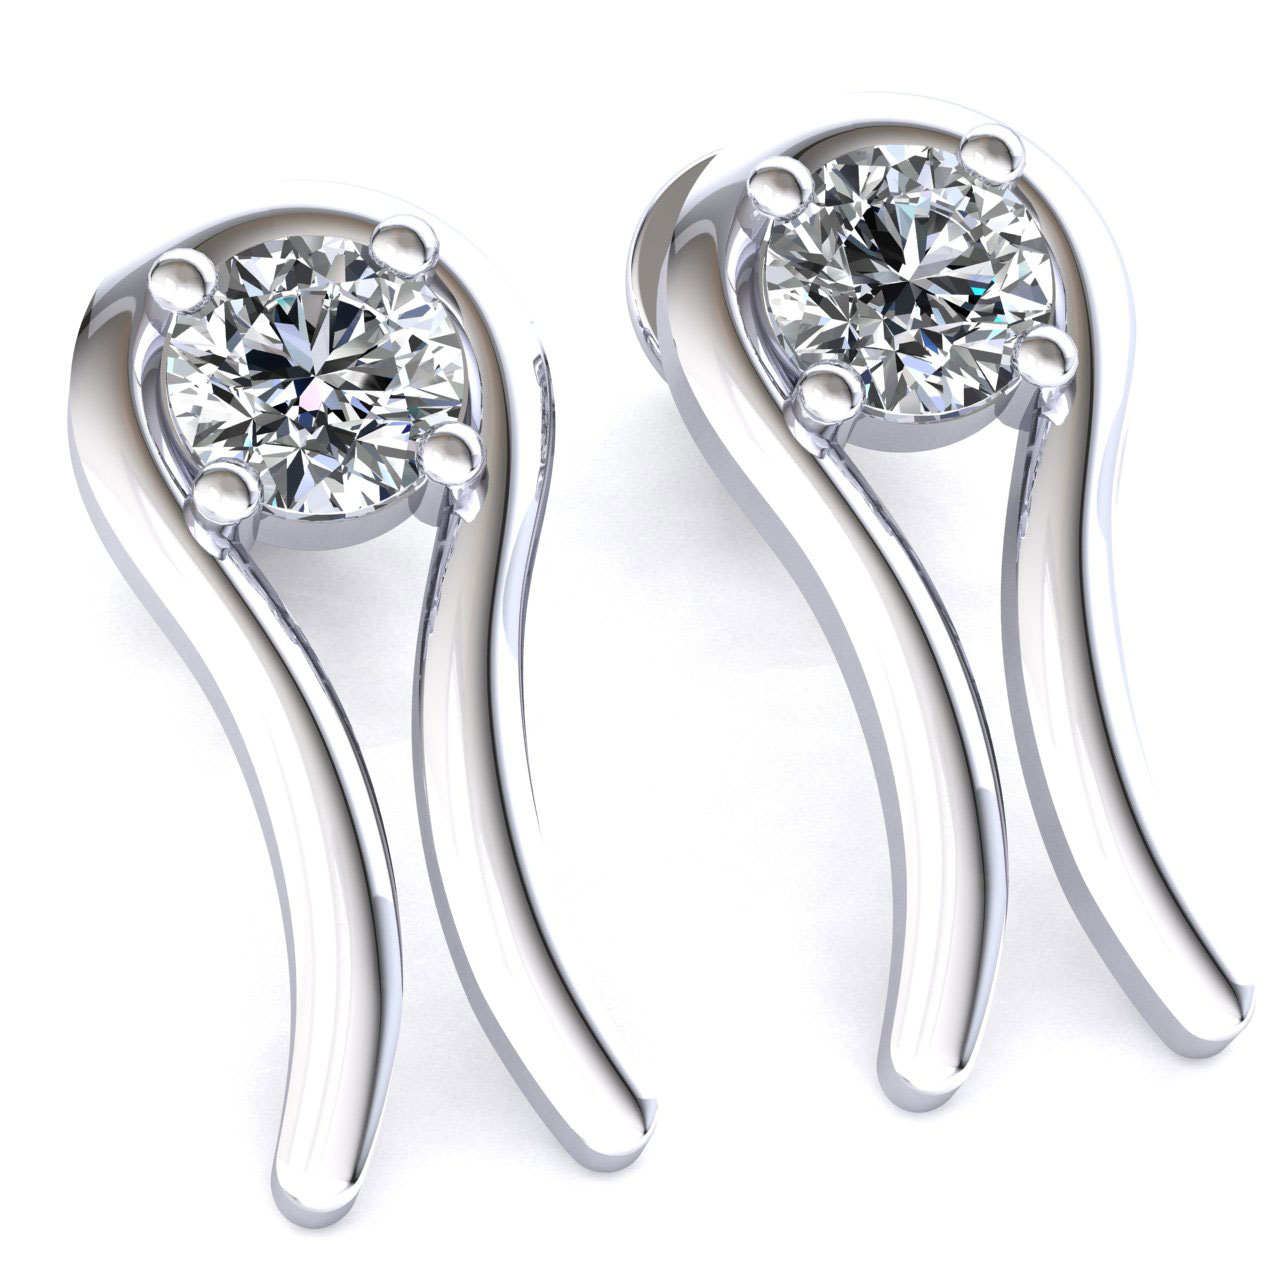 Pre-owned Jewelwesell Genuine 0.75ct Round Cut Diamond Ladies Curved Solitaire Earrings 14k Gold